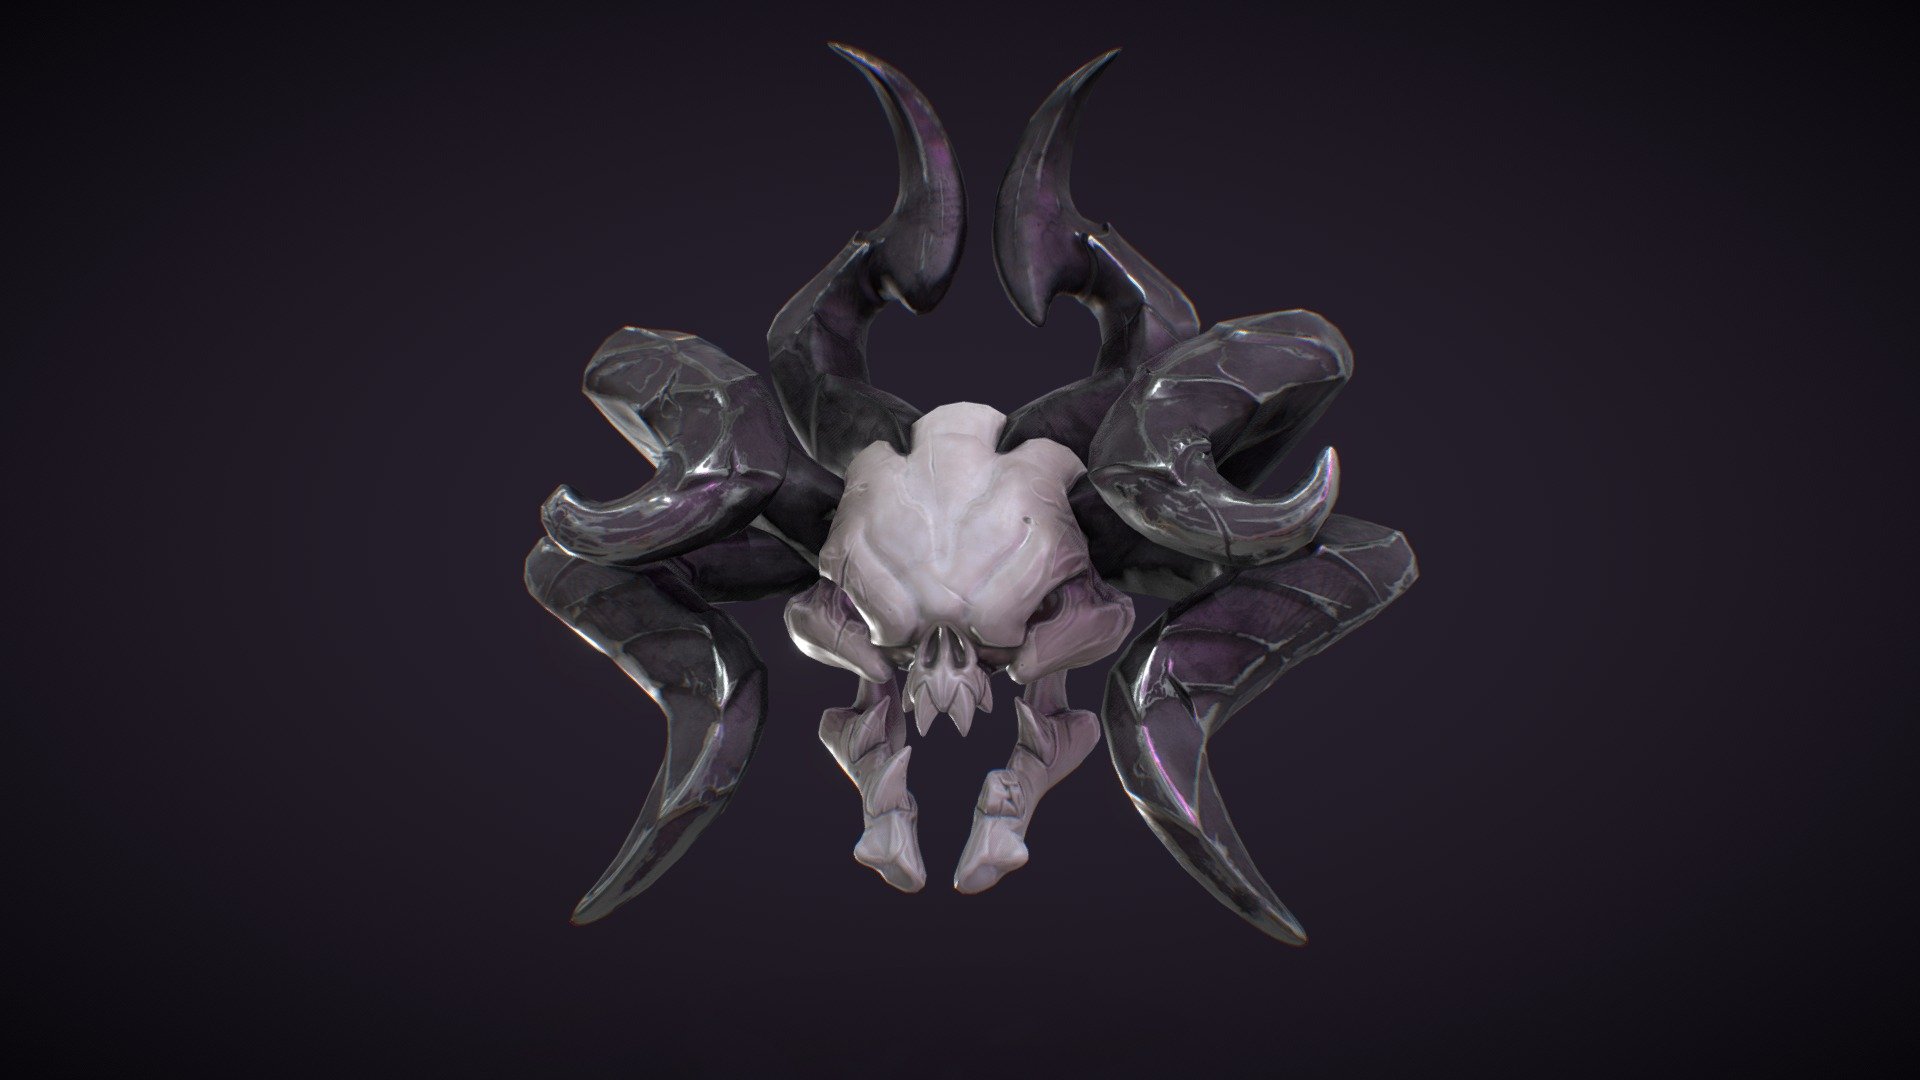 i tried to make a demon skull inspired by dark siders
hope you like it - Demon skull 💀 - 3D model by aymane allouch (@aymaneallouch) 3d model